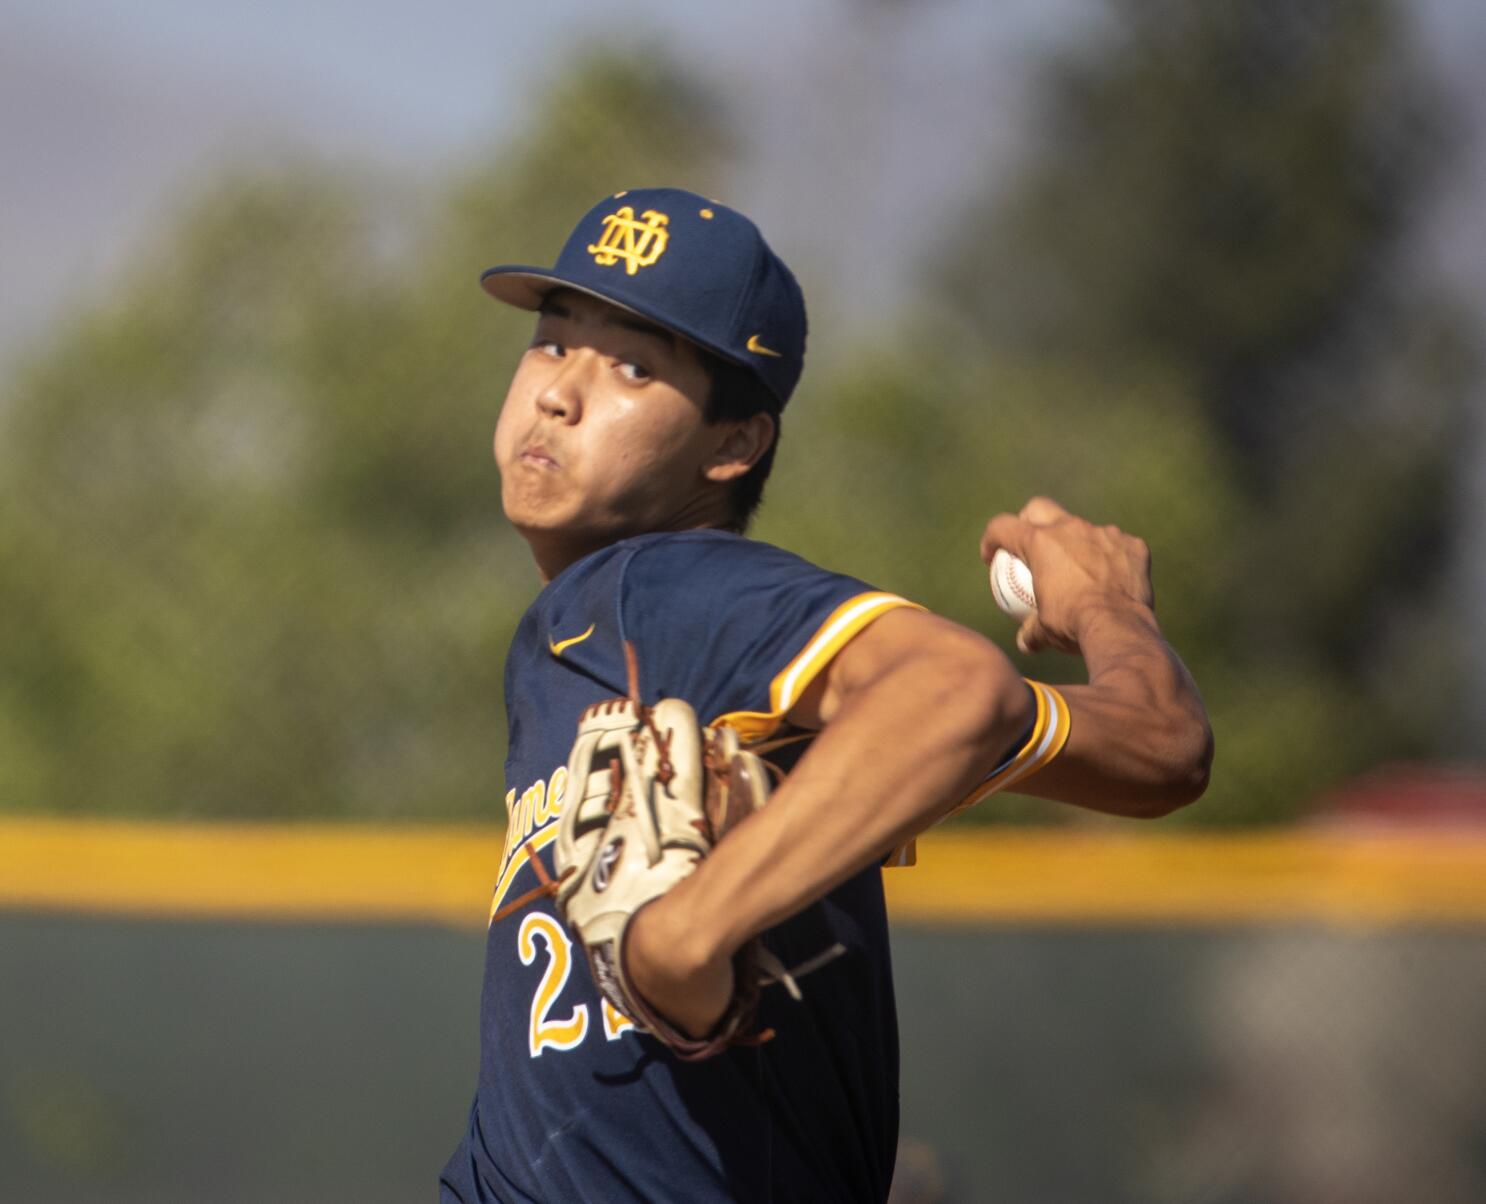 Notre Dame's Justin Lee is Times' baseball player of the year